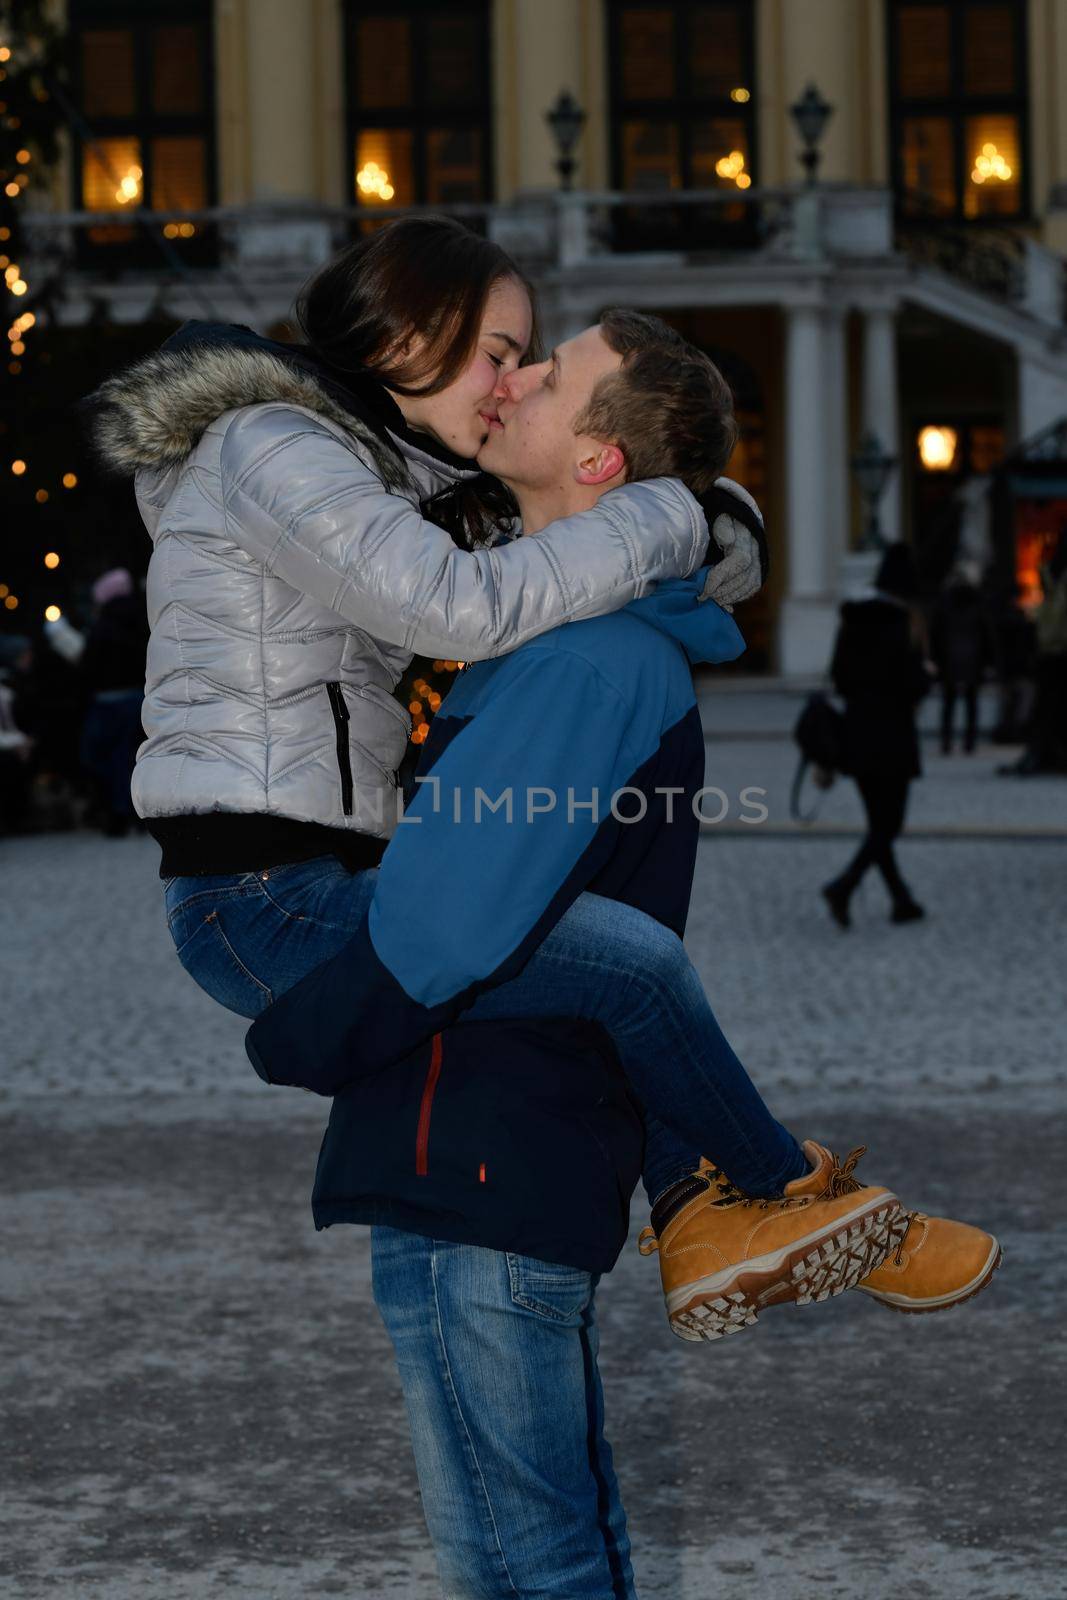 A young couple in love hugs and kisses at the Christmas market.